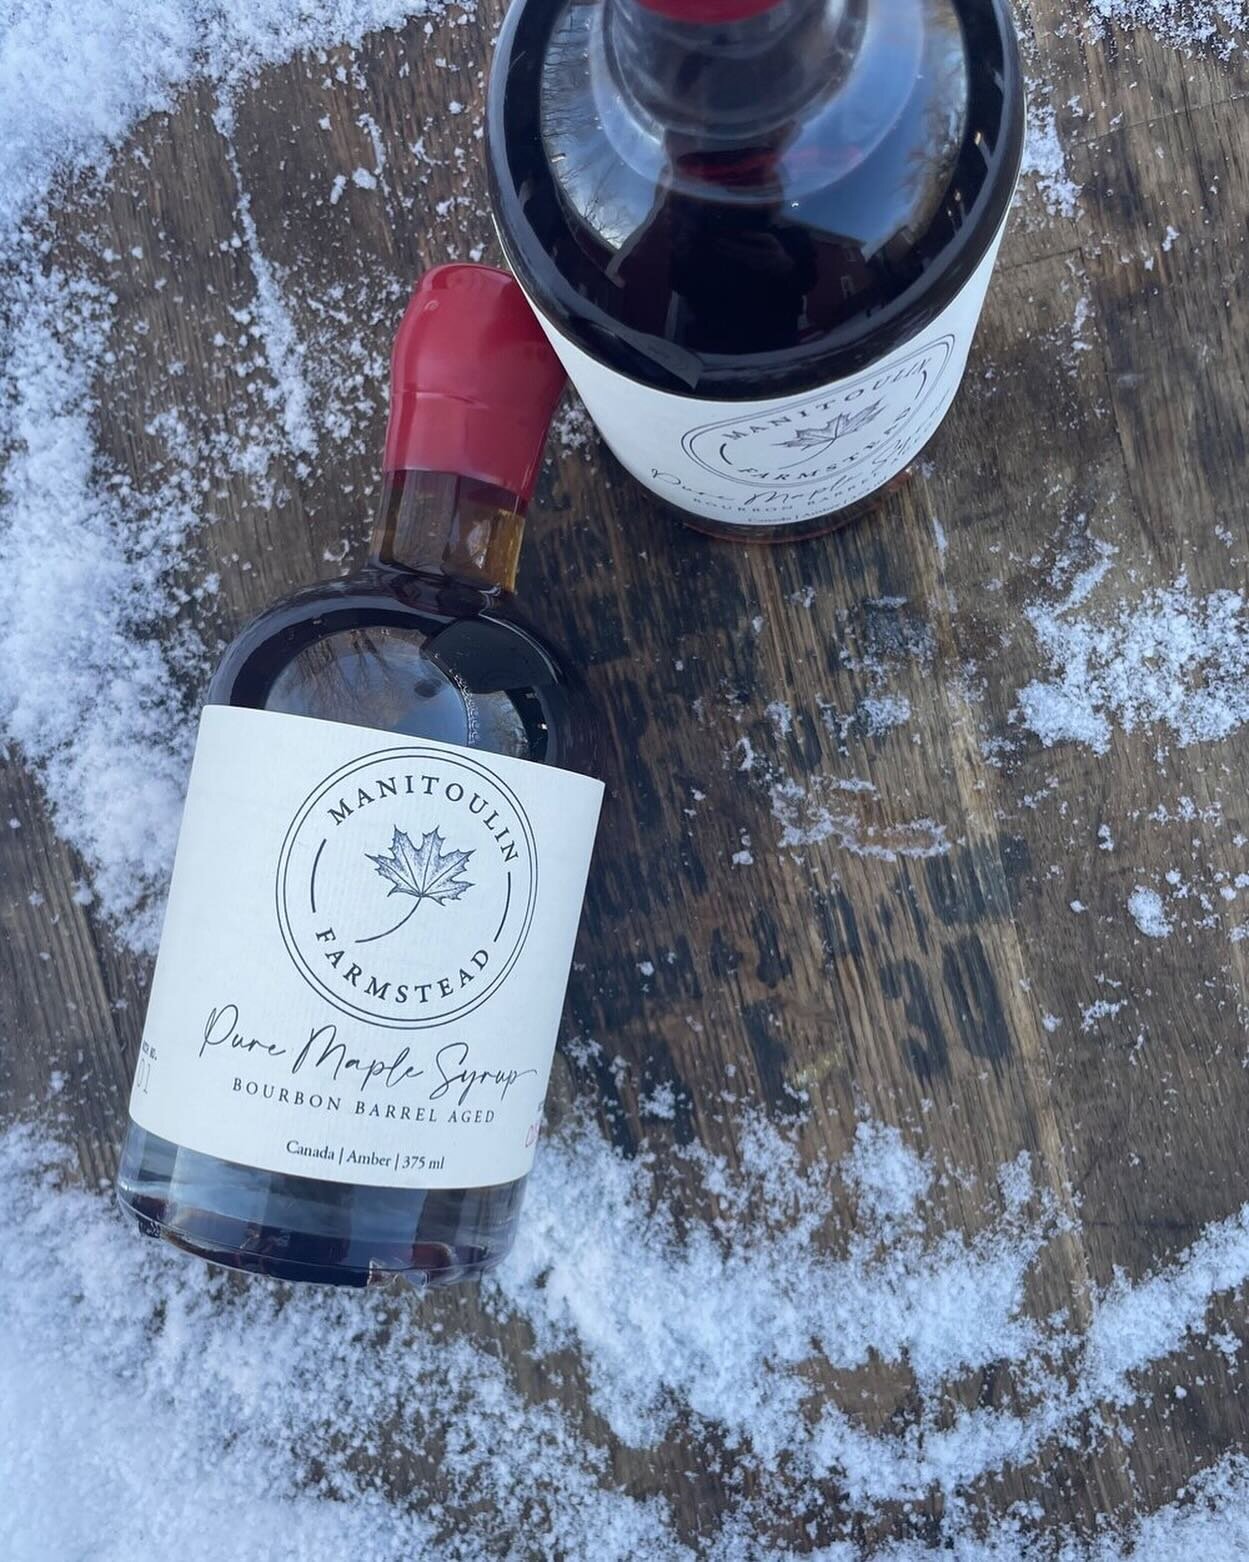 🍁 Bourbon Barrel-Aged Maple Syrup is BACK! 

Looking for a unique Manitoulin gift this Christmas season? We&rsquo;ve got you covered. Harvested here on the Farmstead and aged in a Bourbon barrel for 8 months, our maple syrup truly is one of a kind! 